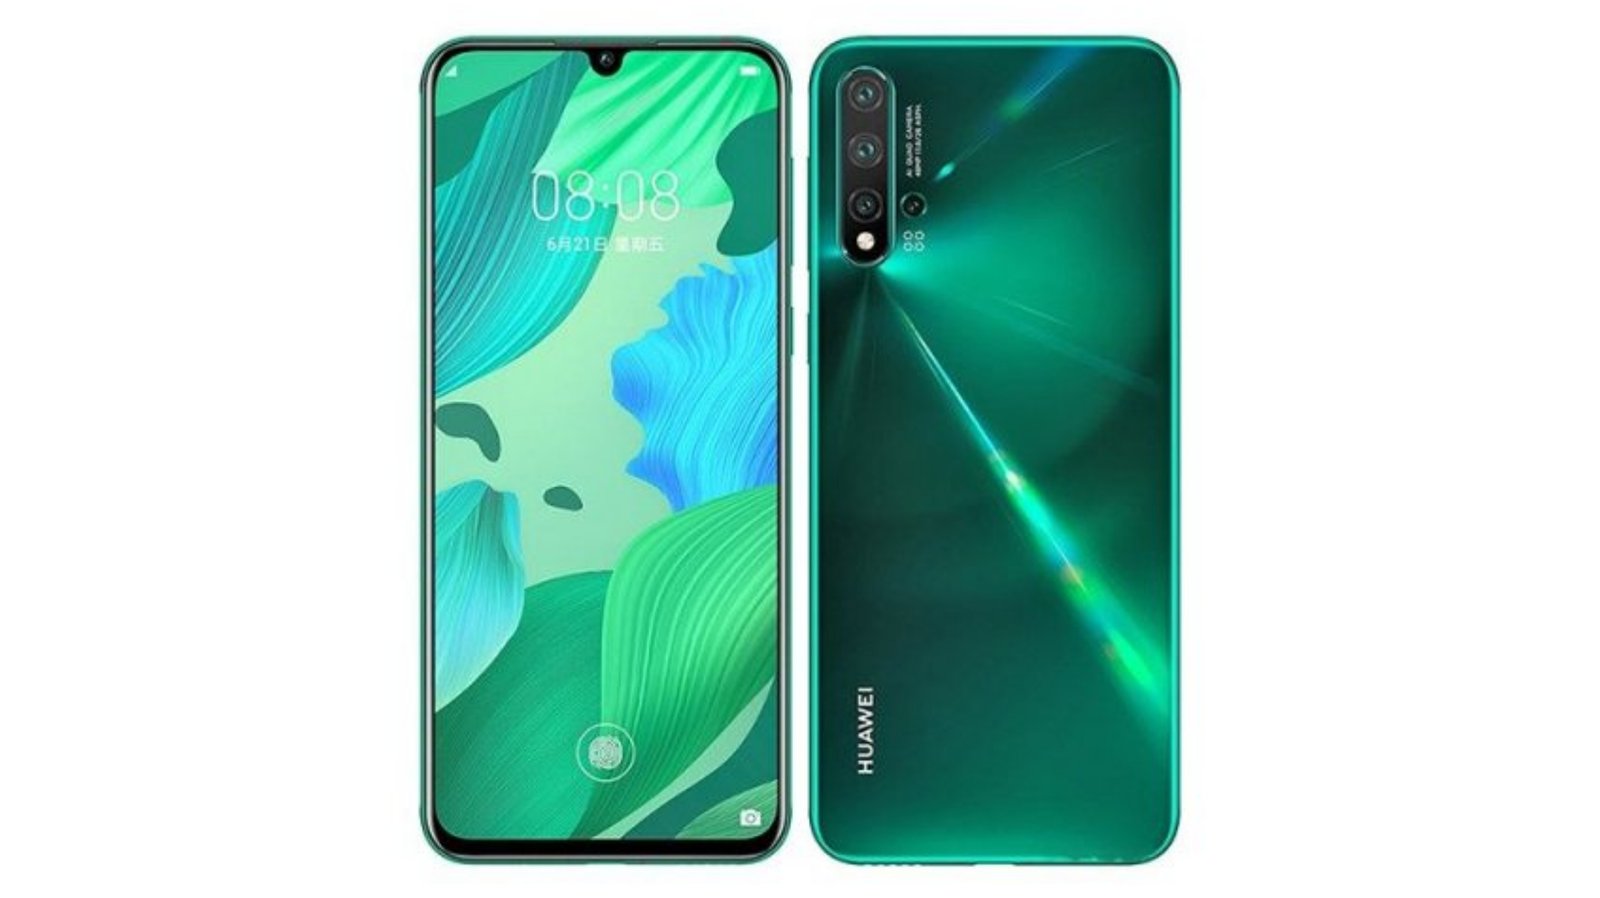 Huawei-nova-5-Specs-Price-and-Review